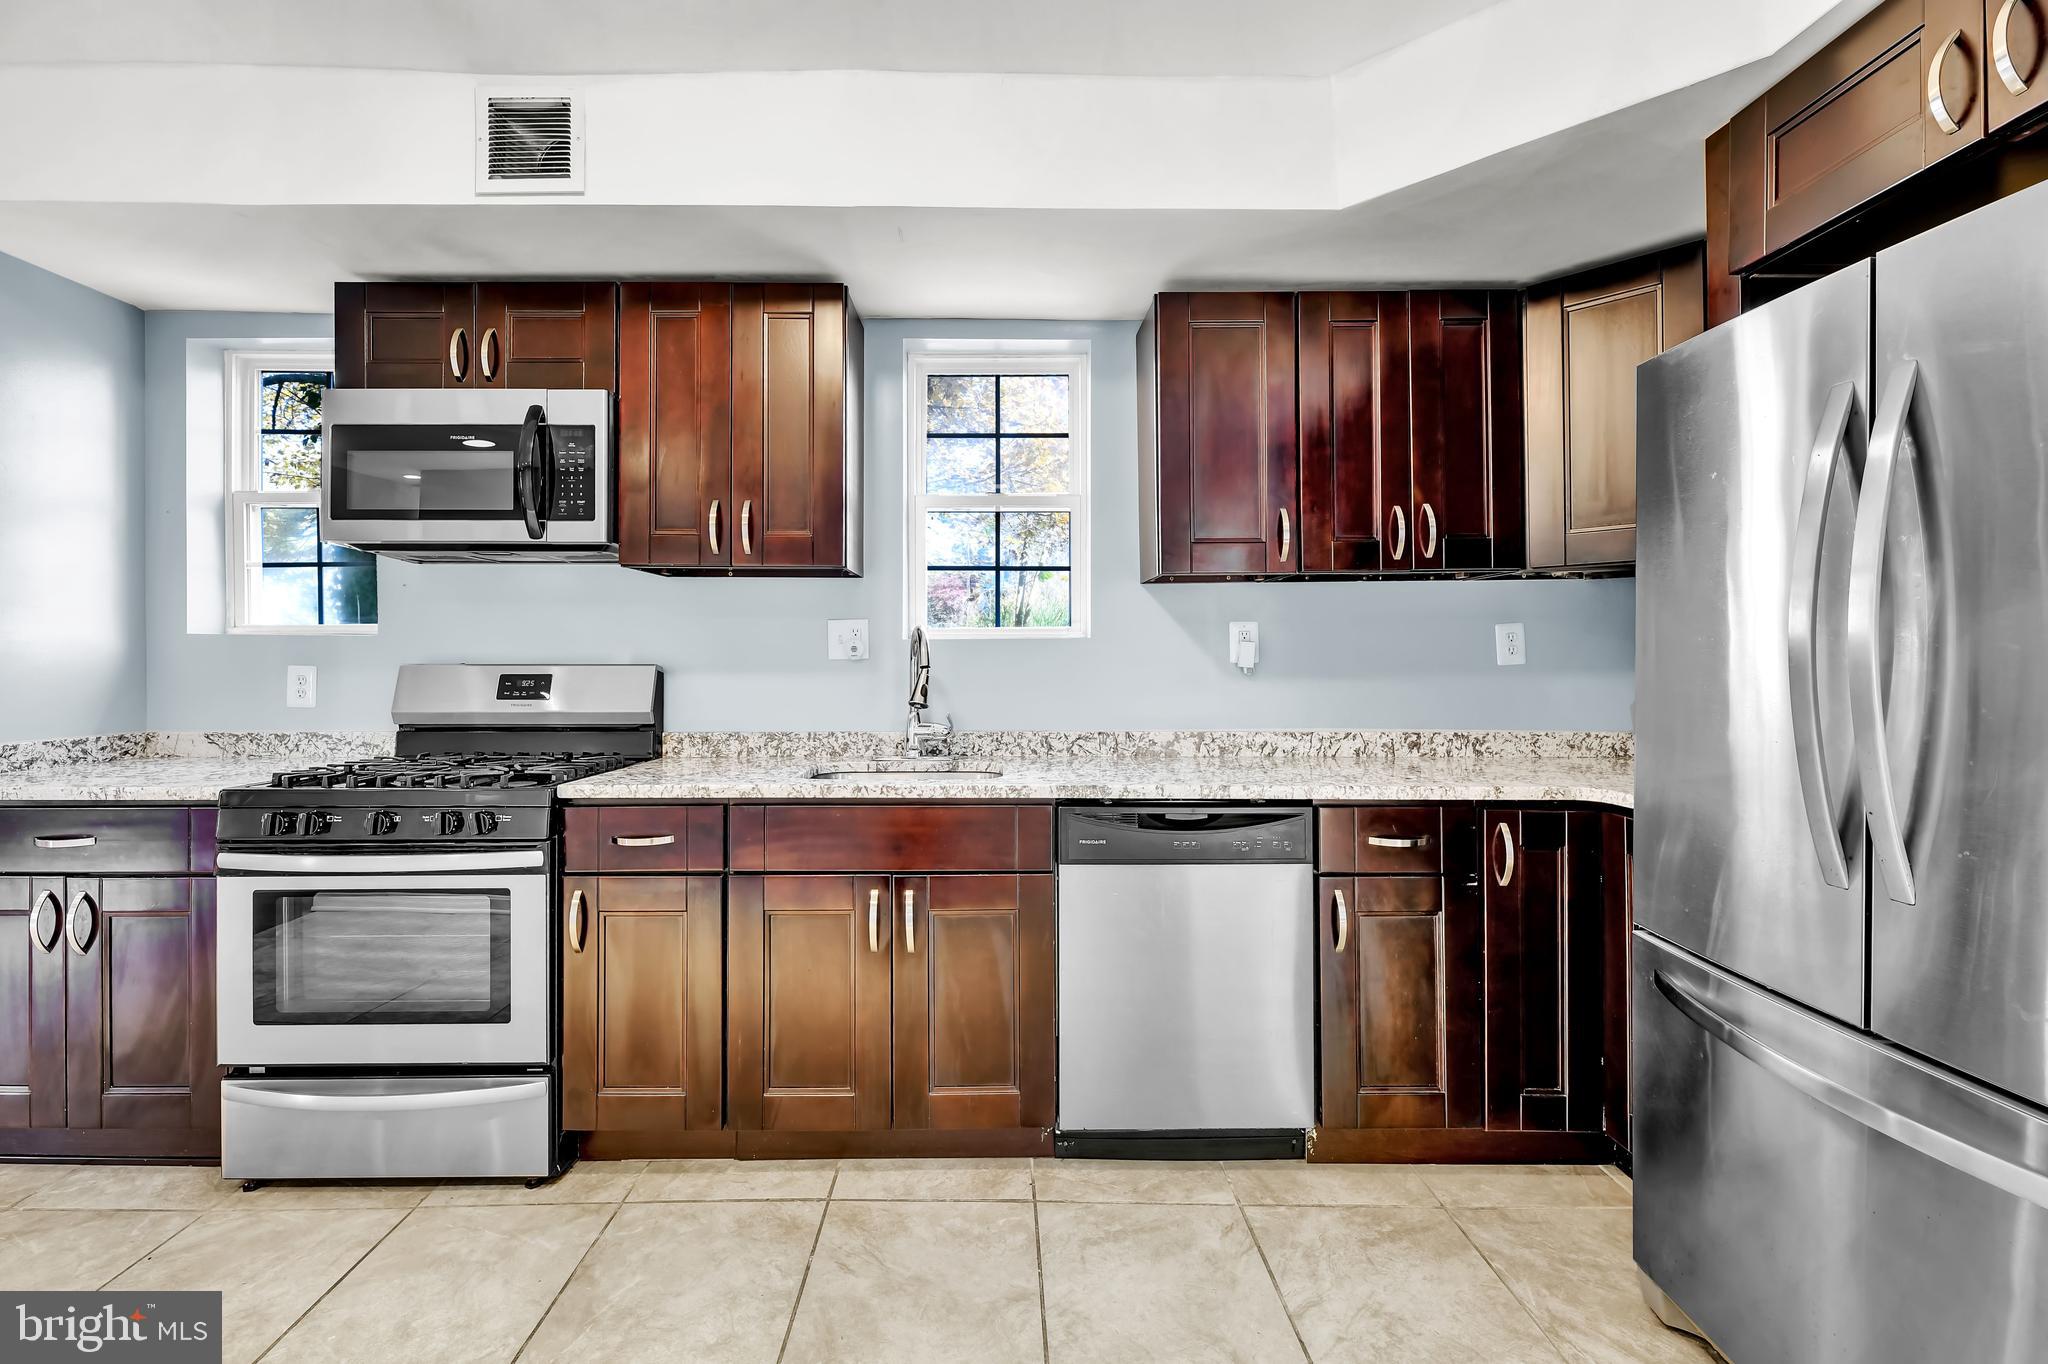 a kitchen with stainless steel appliances granite countertop a refrigerator stove and oven